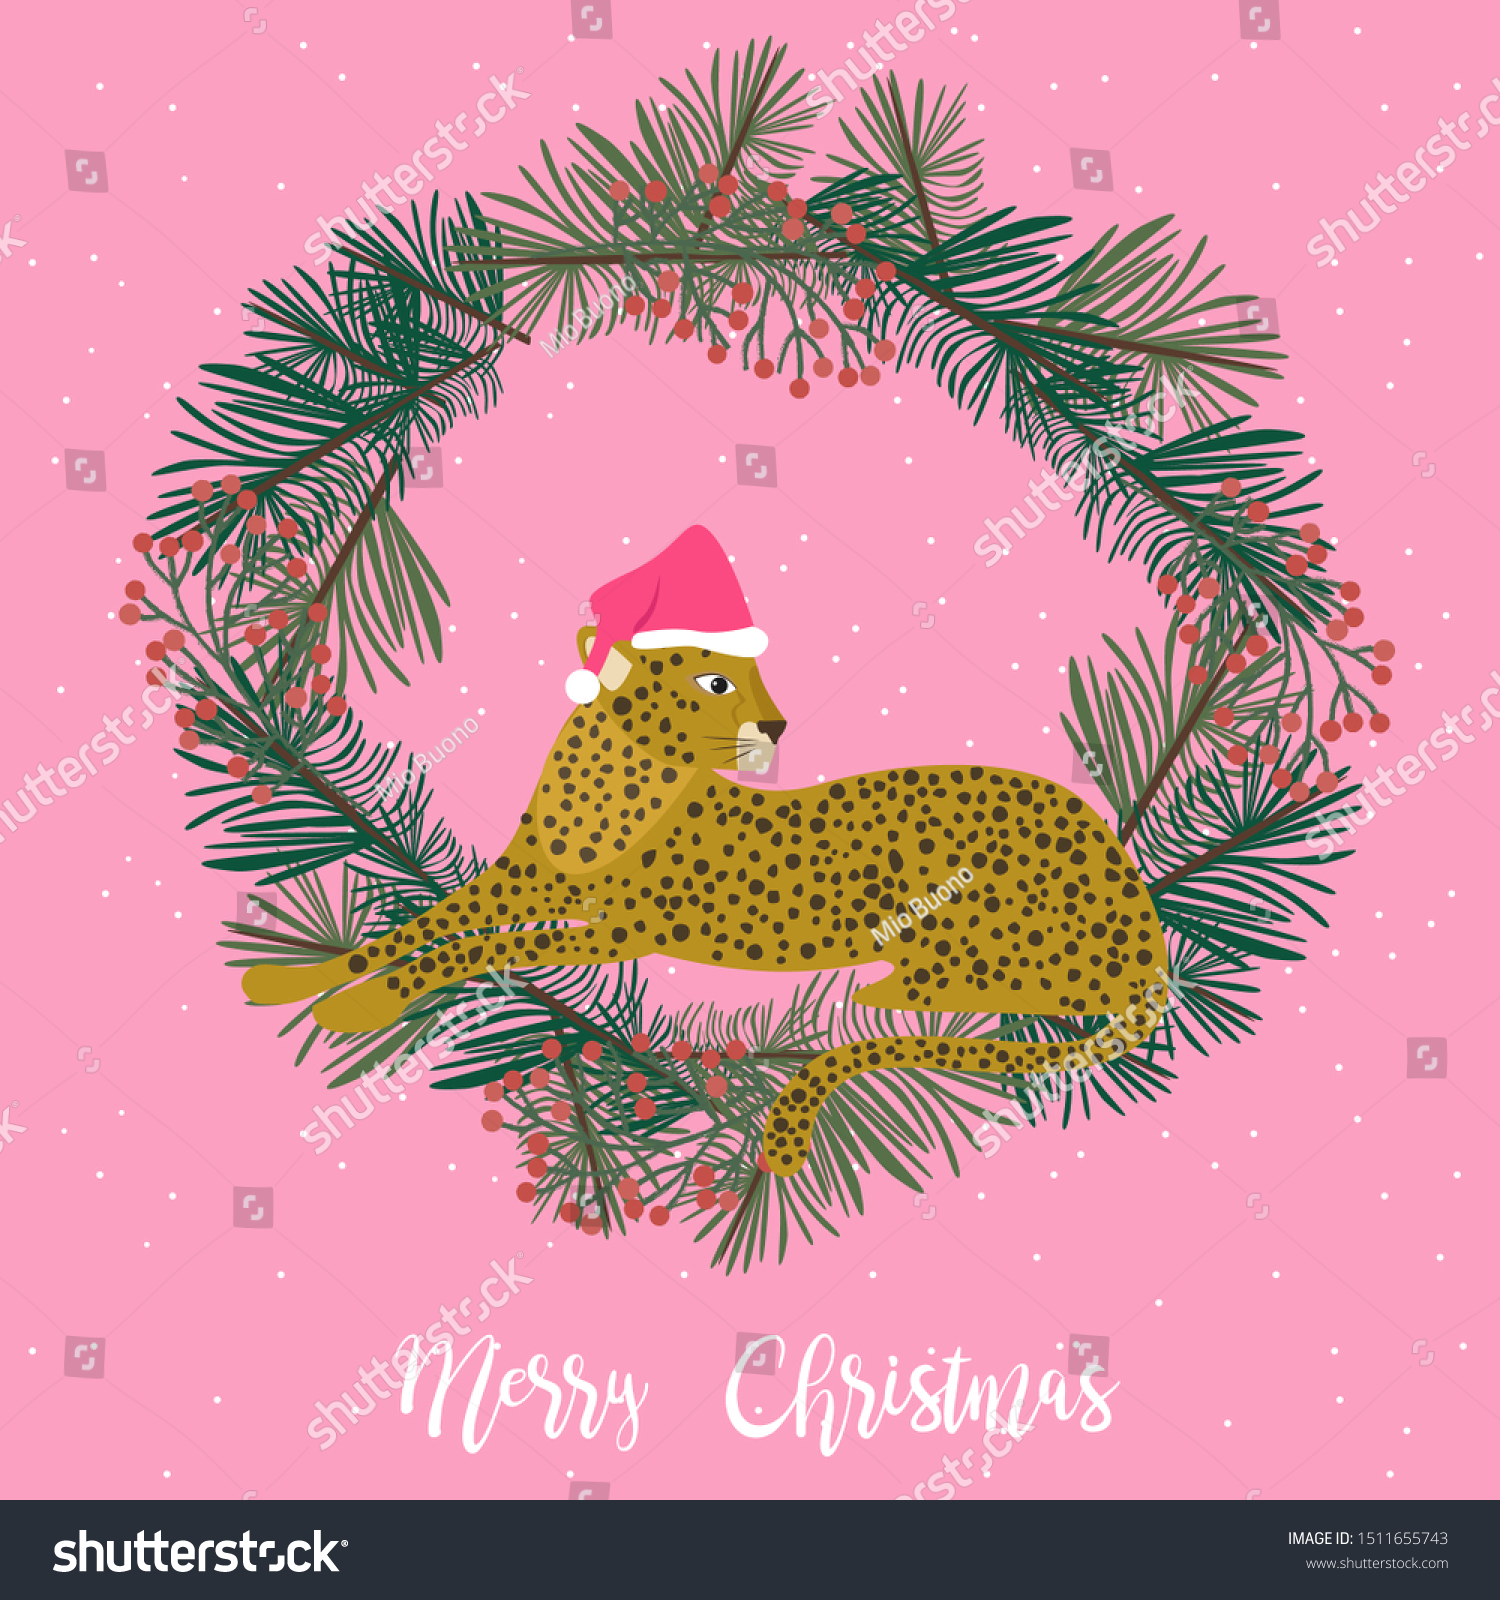 Merry Christmas Card Leopard Gift Boxes Stock Vector Royalty Free 1511655743